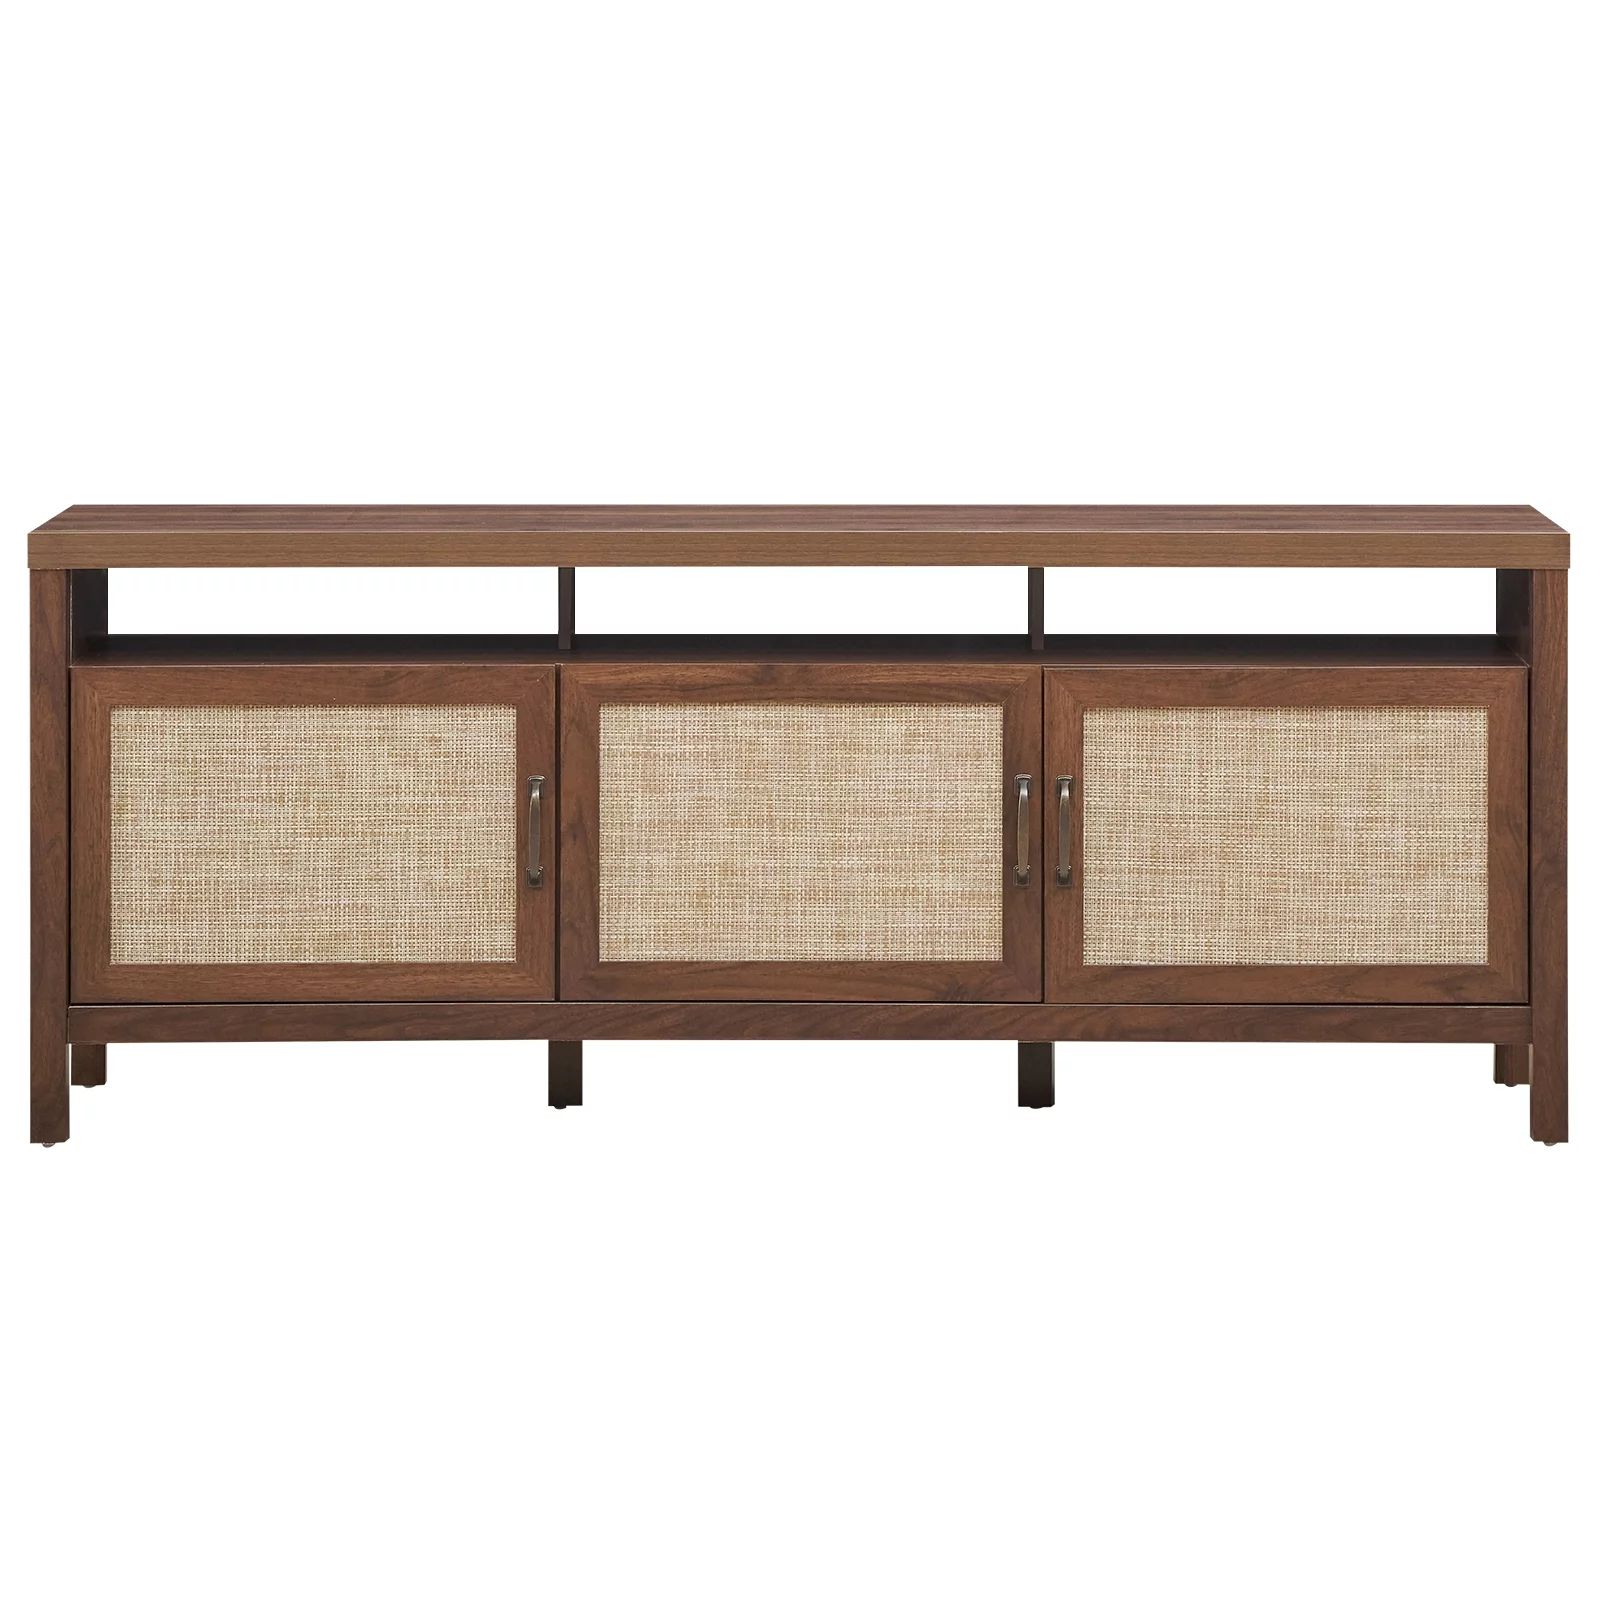 Topbuy Universal TV Stand Cabinet Television Media Console with 3 Rattan Doors Walnut | Walmart (US)